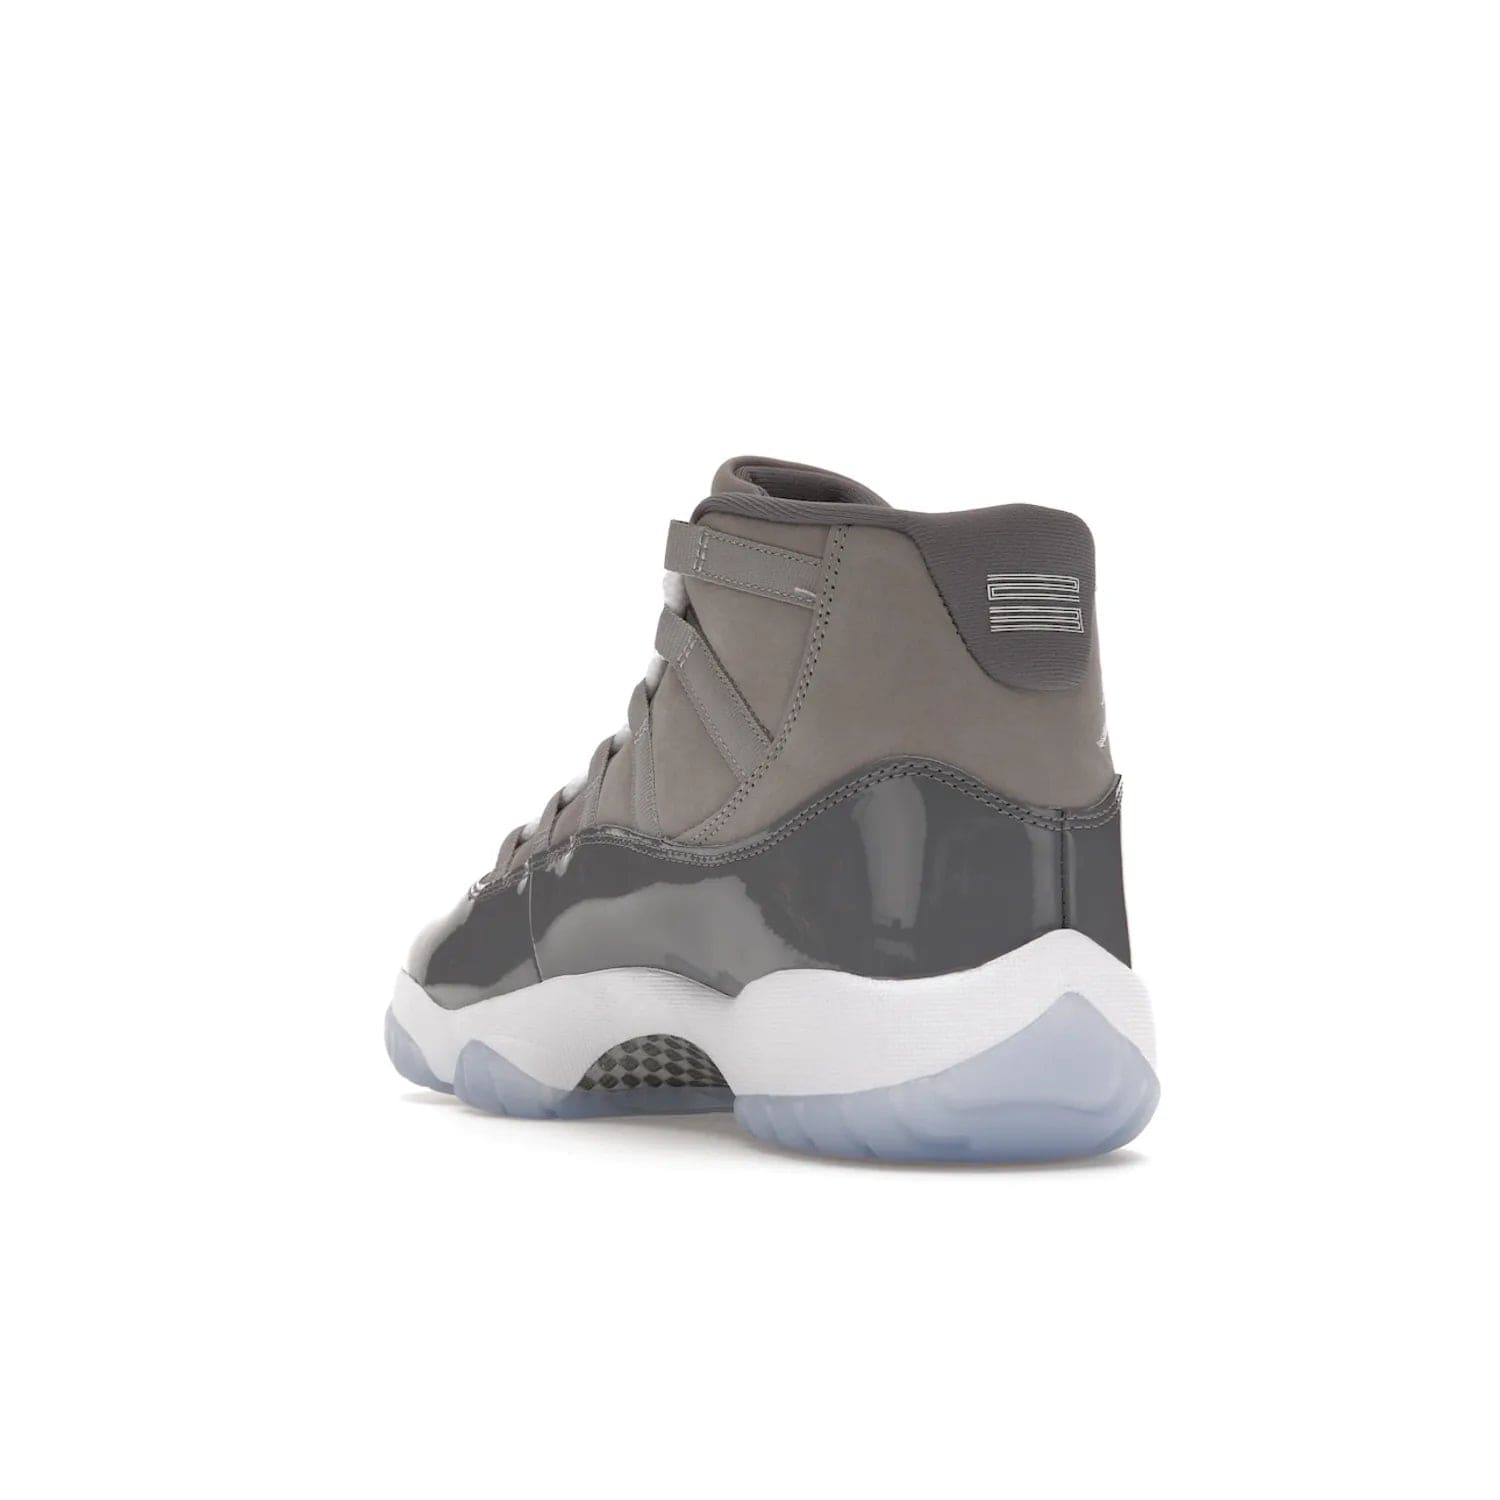 Jordan 11 Retro Cool Grey (2021) - Image 25 - Only at www.BallersClubKickz.com - Shop the Air Jordan 11 Retro Cool Grey (2021) for a must-have sneaker with a Cool Grey Durabuck upper, patent leather overlays, signature Jumpman embroidery, a white midsole, icy blue translucent outsole, and Multi-Color accents.  Released in December 2021 for $225.